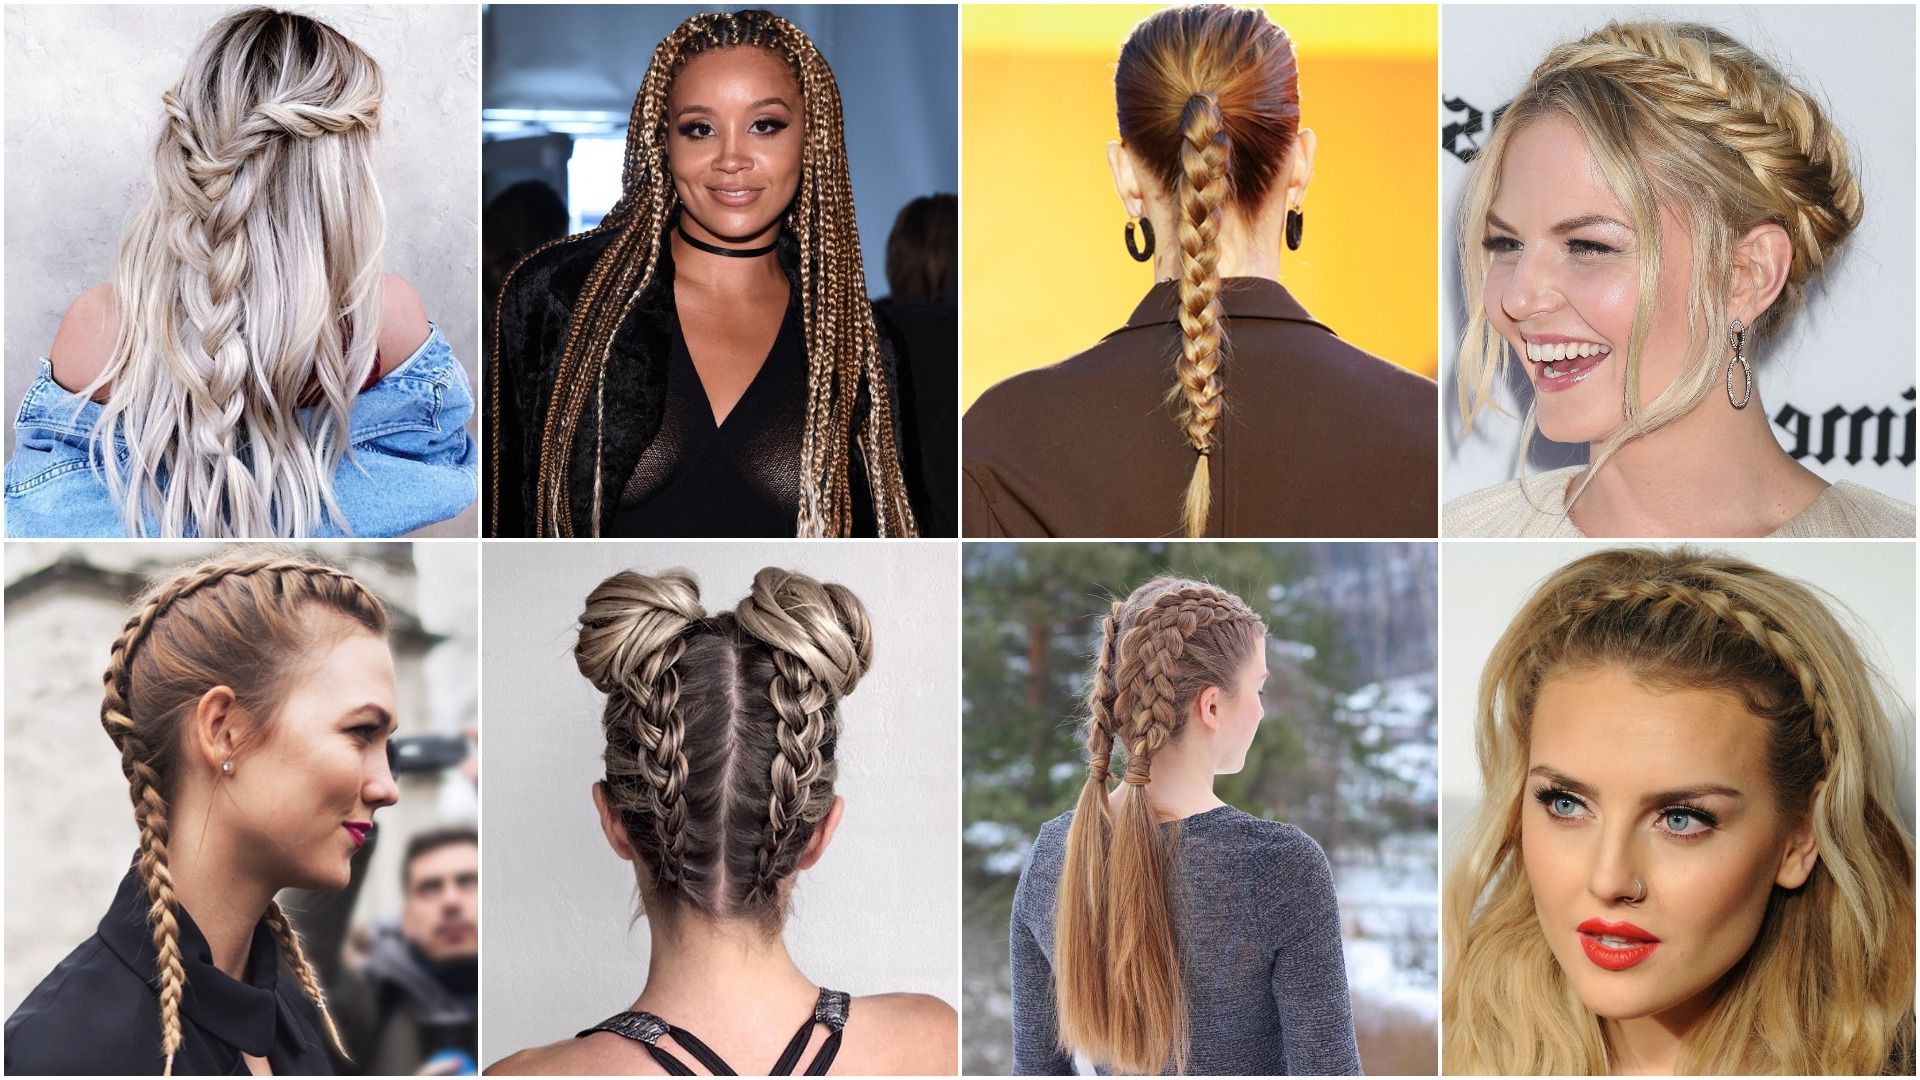 40 Different Styles To Make Braid Hairstyles For Women Intended For Current Nostalgic Knotted Mermaid Braid Hairstyles (Gallery 19 of 20)